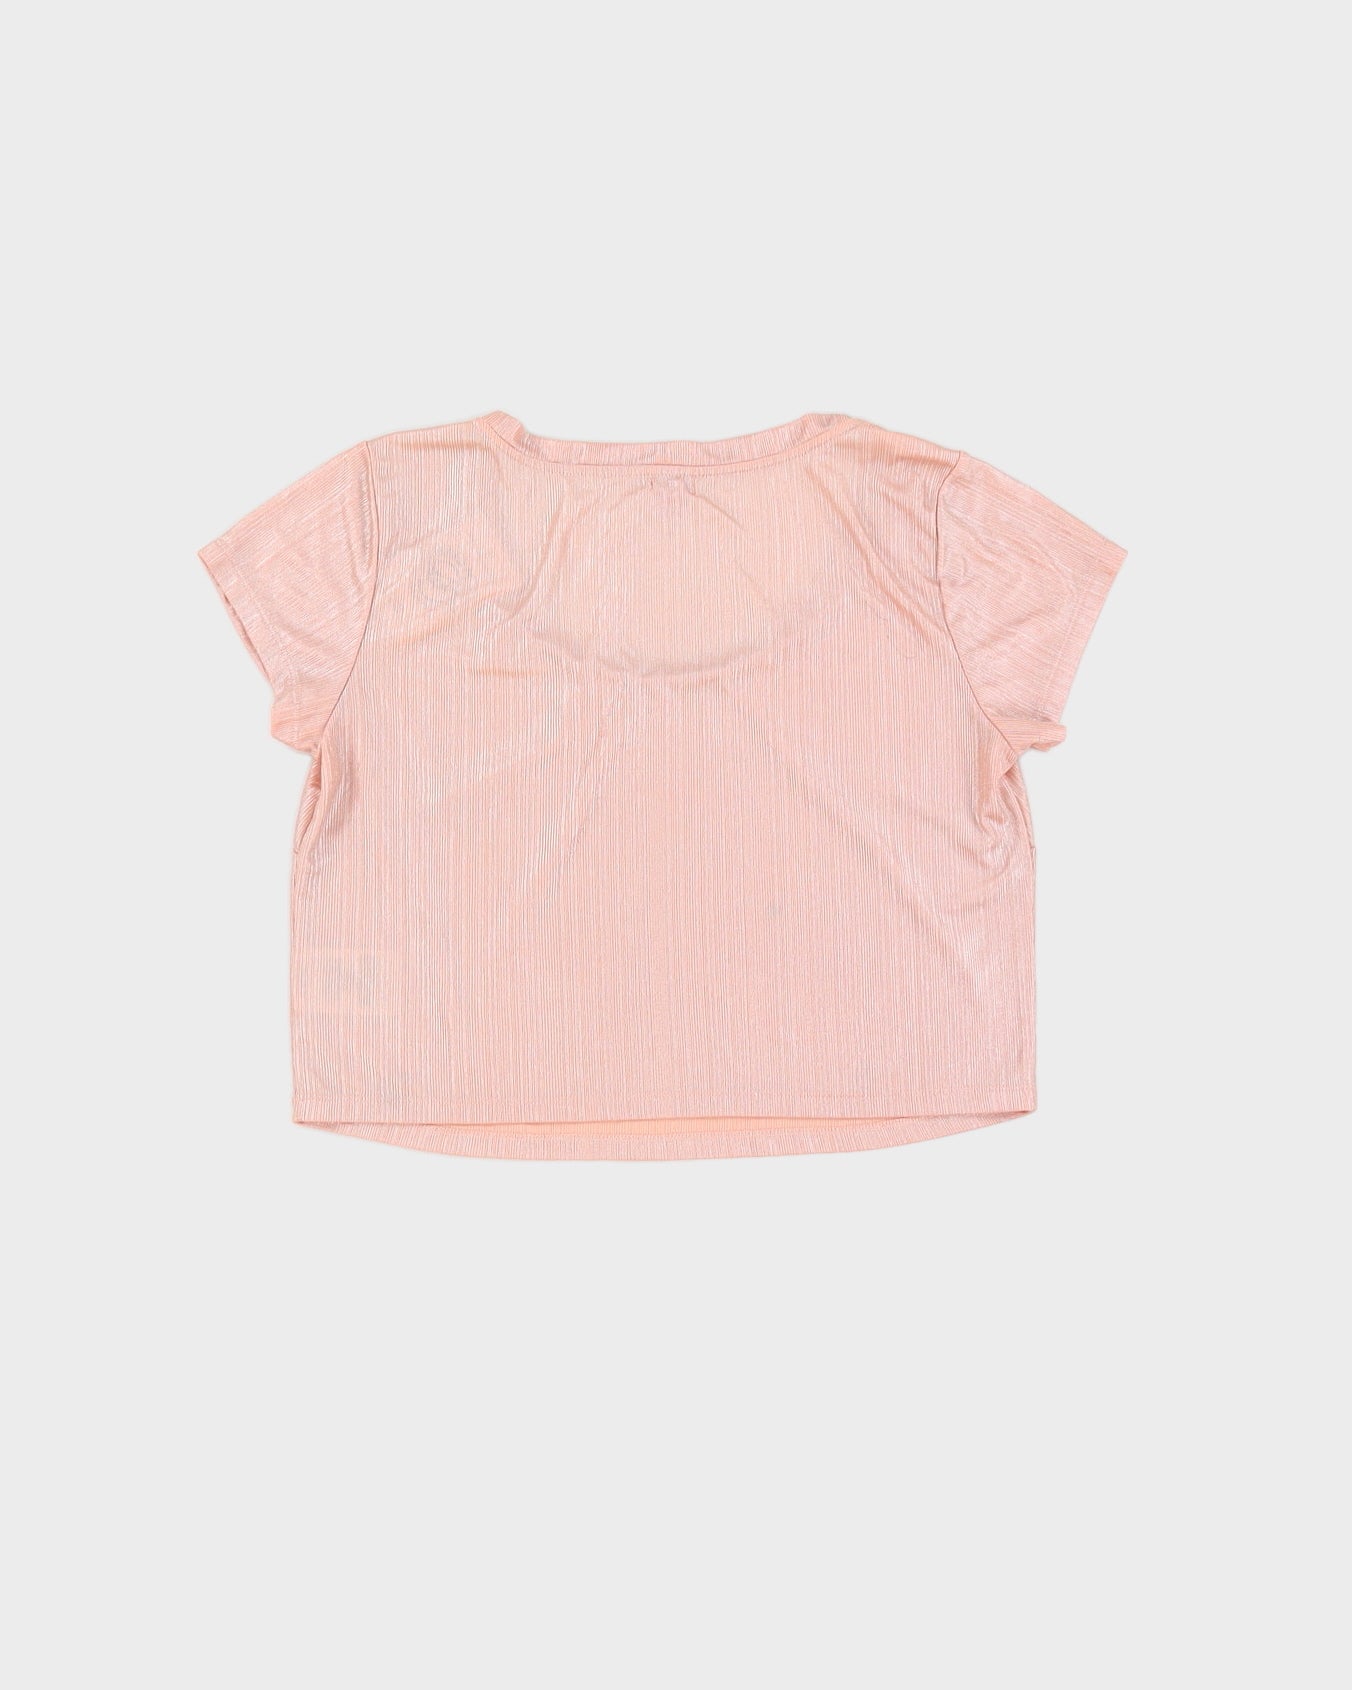 Y2K Guess Pink Short Sleeve Top - S